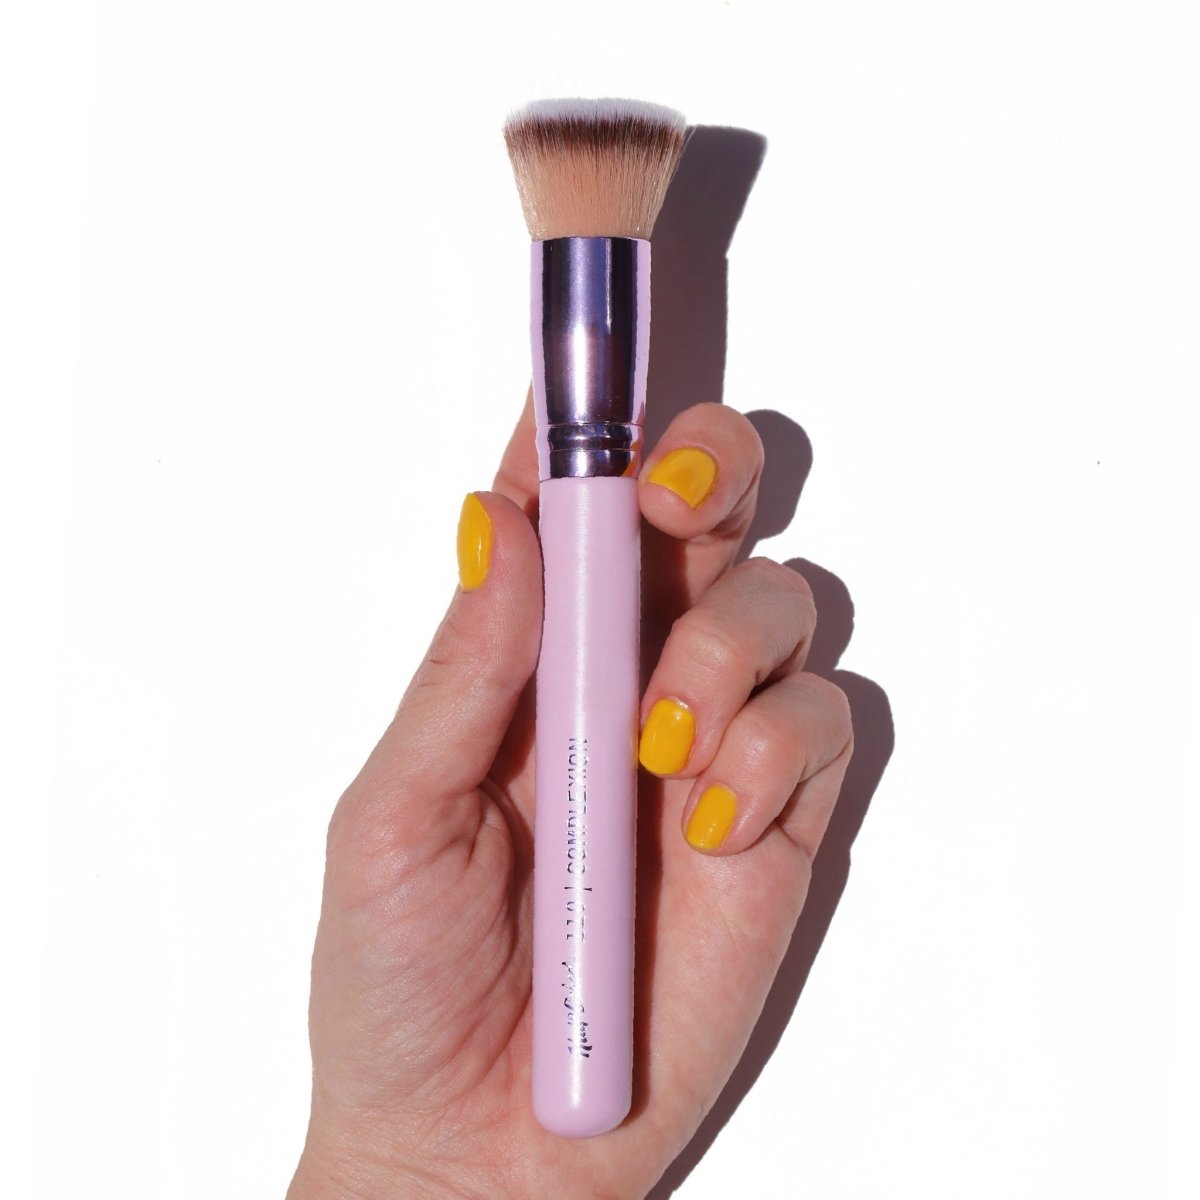 shiny purple flat-top foundation kabuki in hand with yellow fingernails - complexion brush- half caked